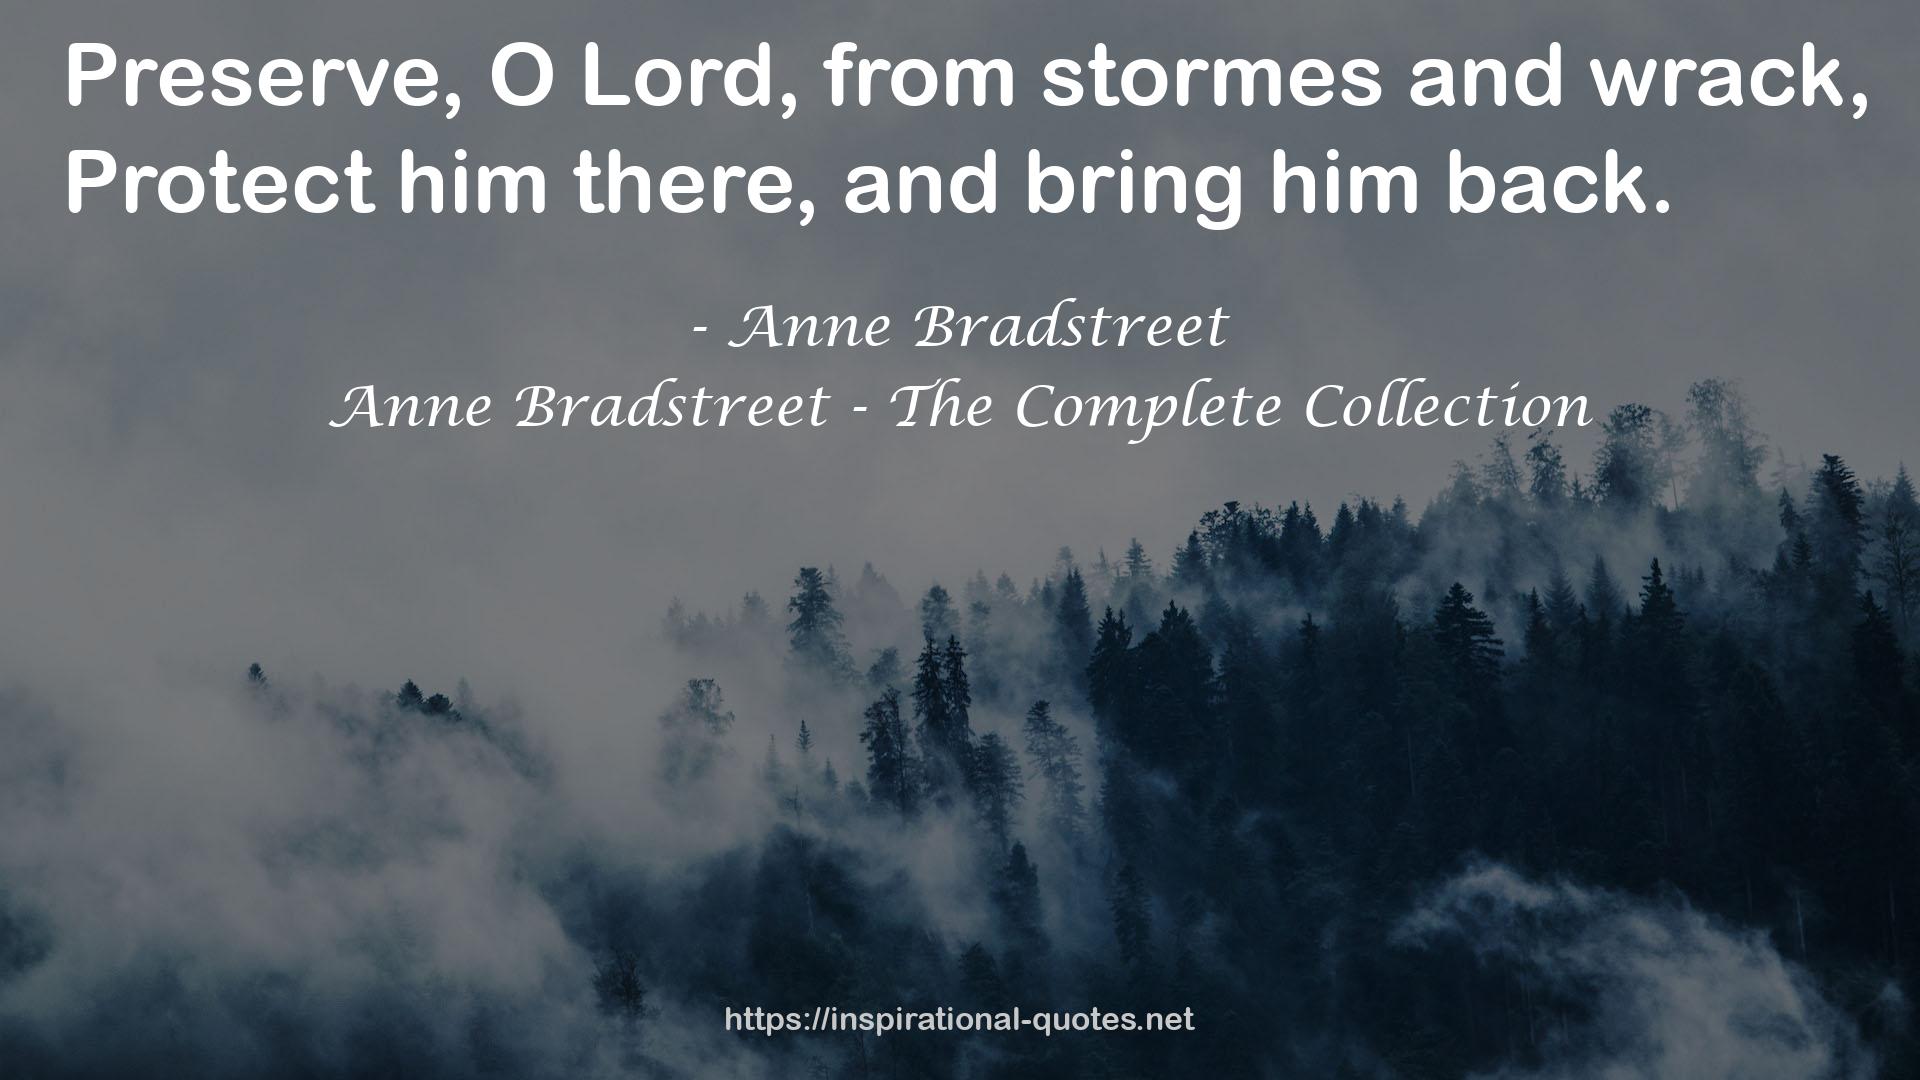 Anne Bradstreet - The Complete Collection QUOTES